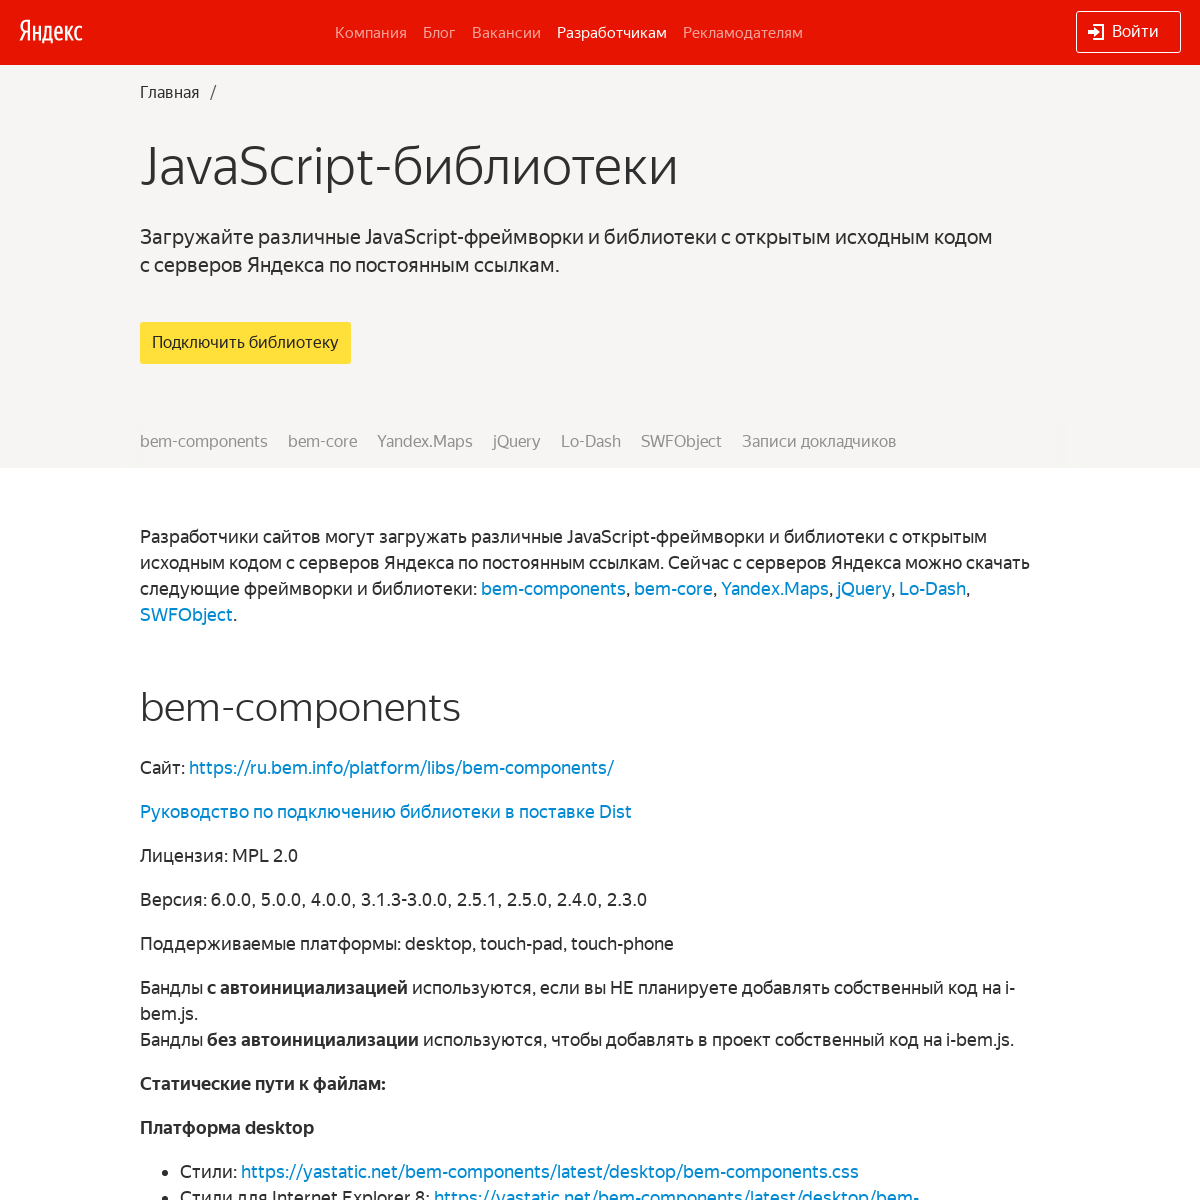 A complete backup of yandex.st